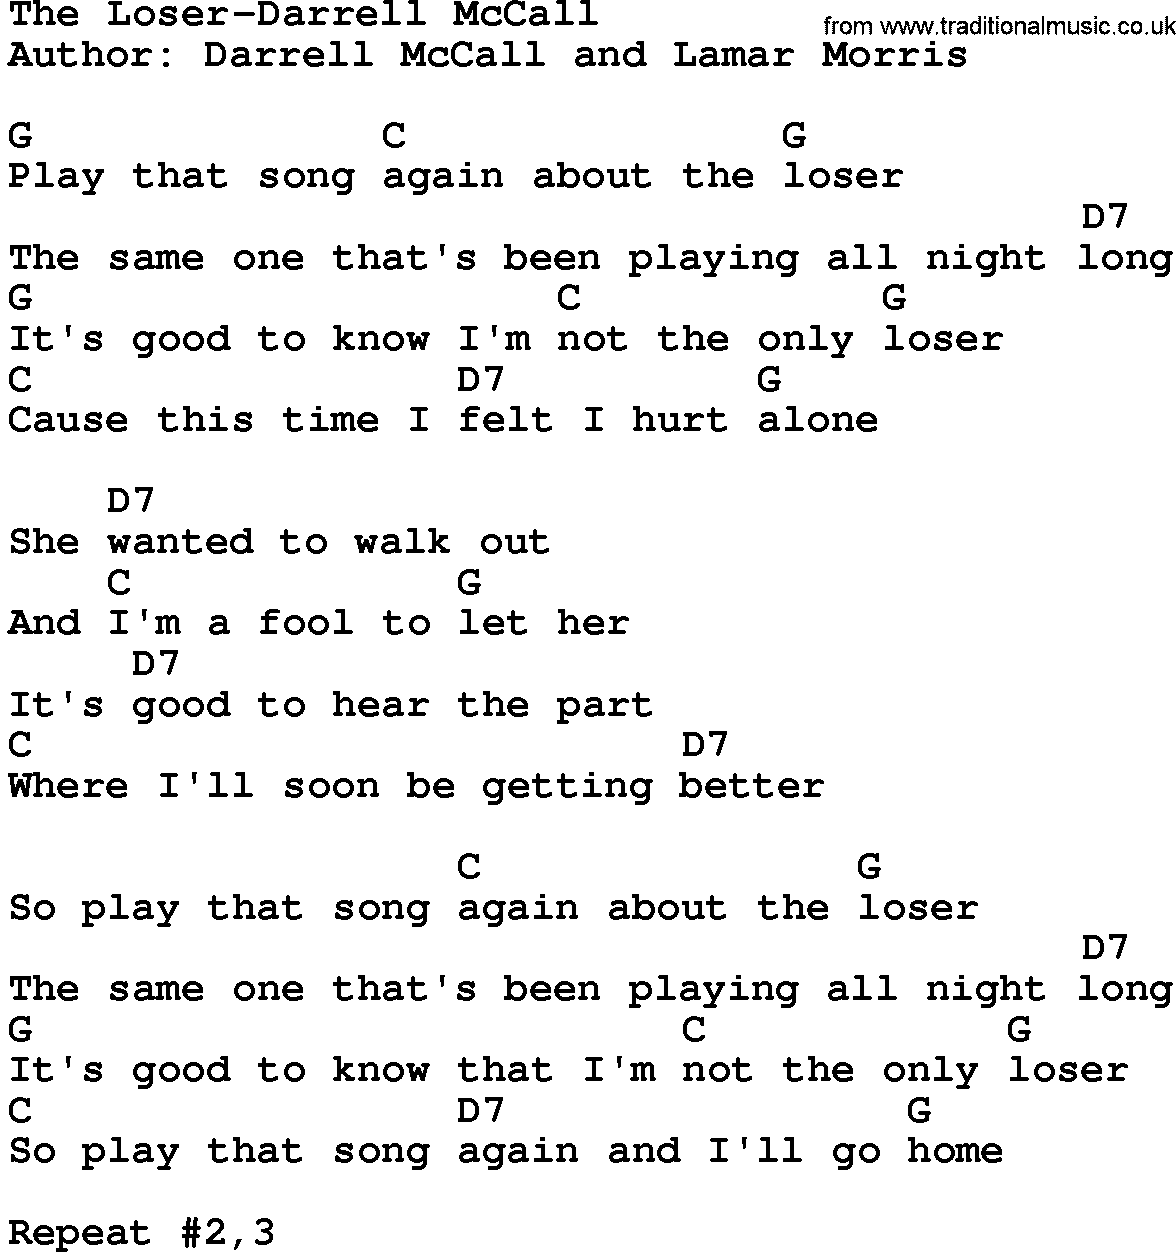 Country music song: The Loser-Darrell Mccall lyrics and chords